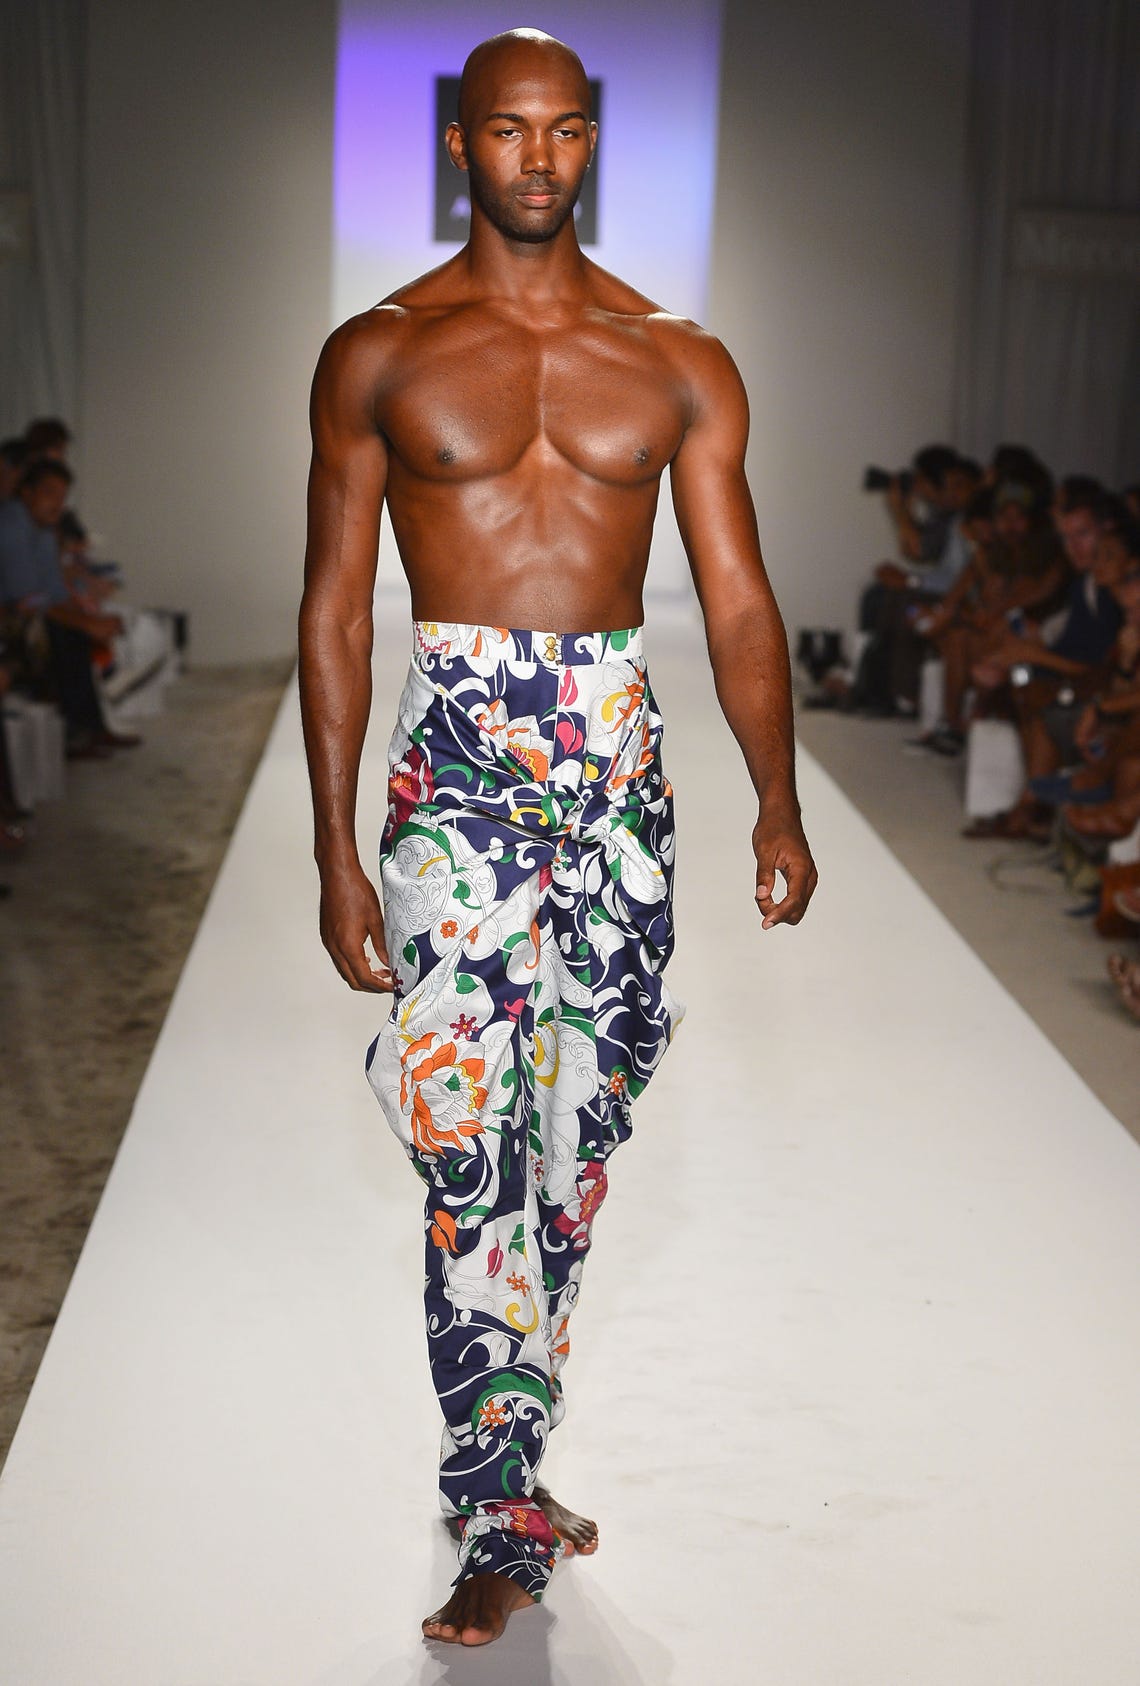 3 Ways to Walk the Runway for Male Models - wikiHow